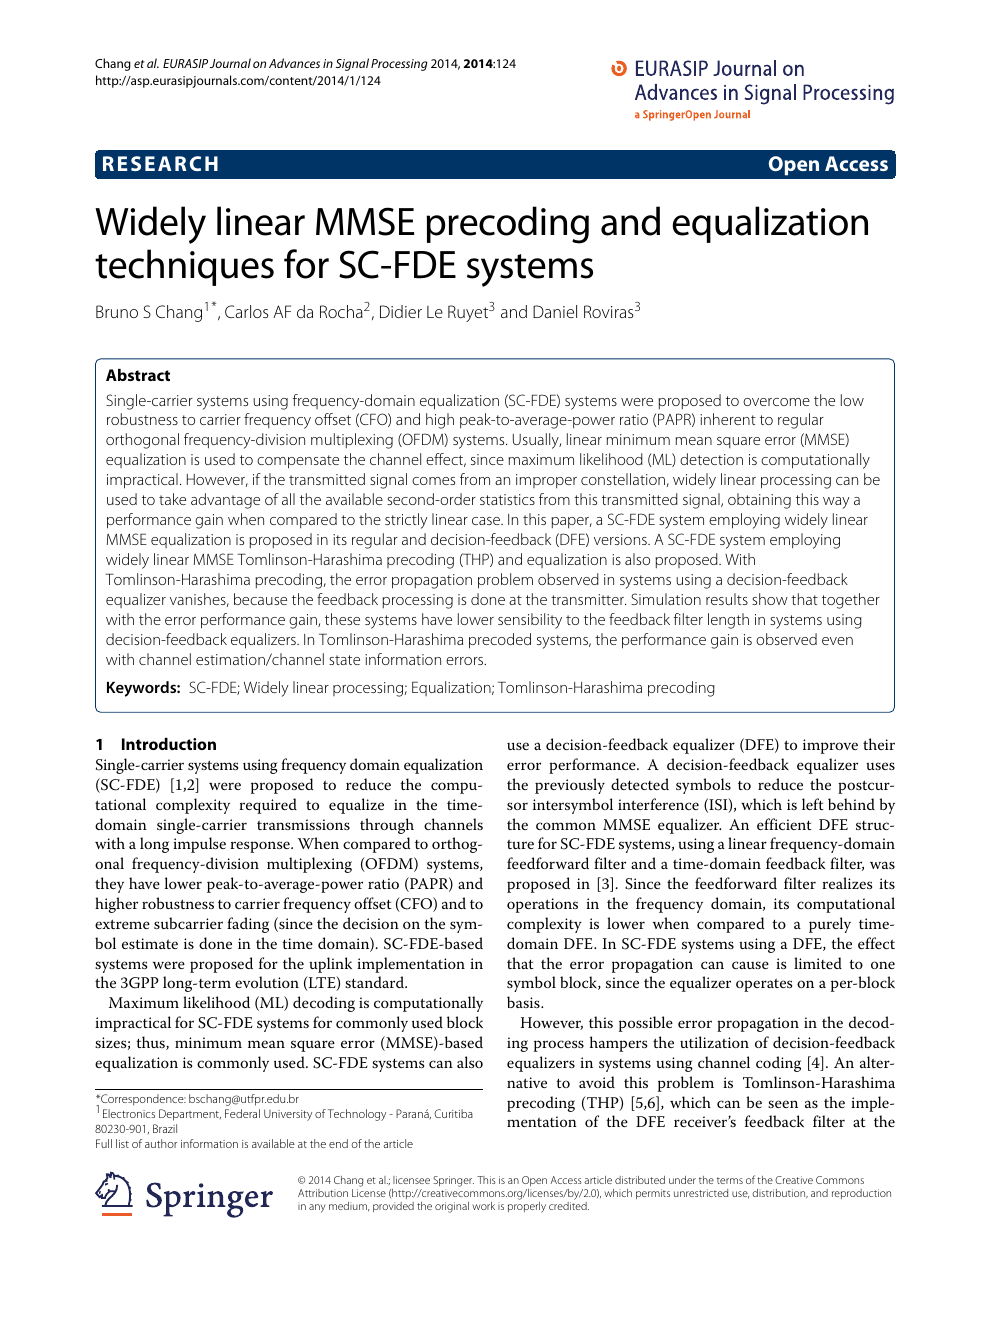 Widely Linear Mmse Precoding And Equalization Techniques For Sc Fde Systems Topic Of Research Paper In Medical Engineering Download Scholarly Article Pdf And Read For Free On Cyberleninka Open Science Hub